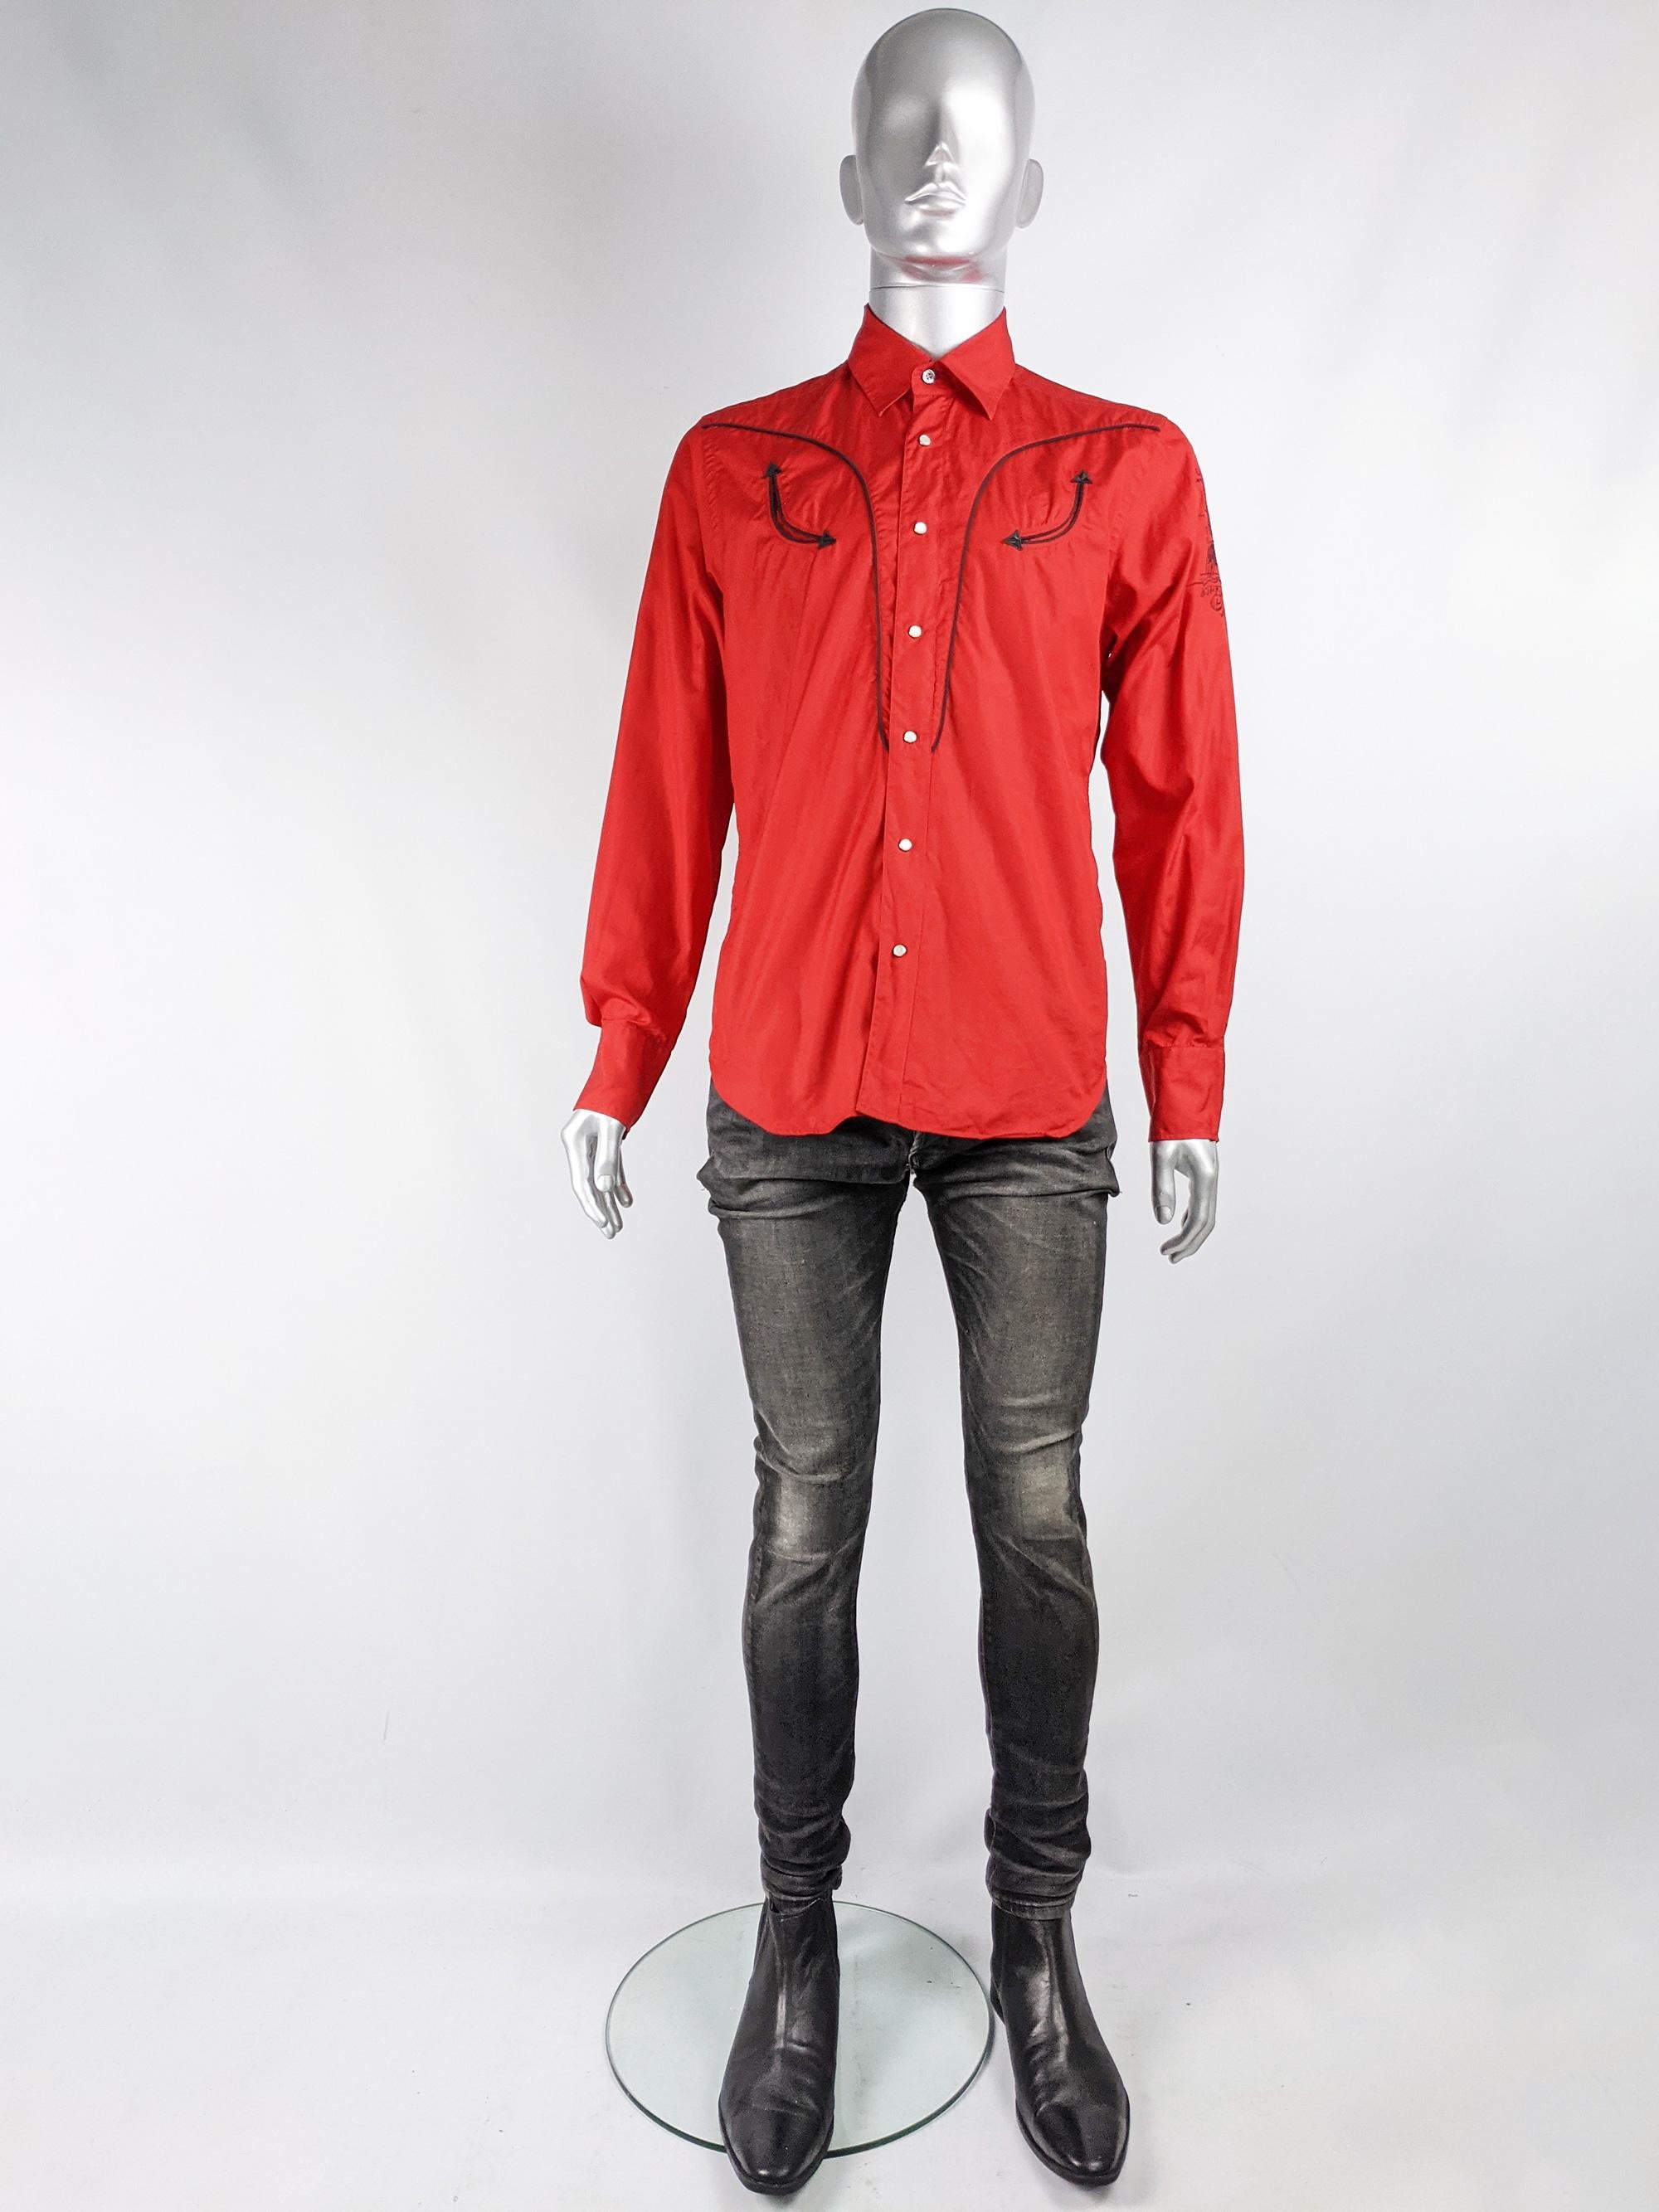 A stylish vintage mens long sleeved shirt from the early 2000s by luxury French fashion designer, Christian Lacroix. In a bold red cotton fabric with a bull embroidery on the sleeve, pearl snap buttons and black binding on the pockets that give a